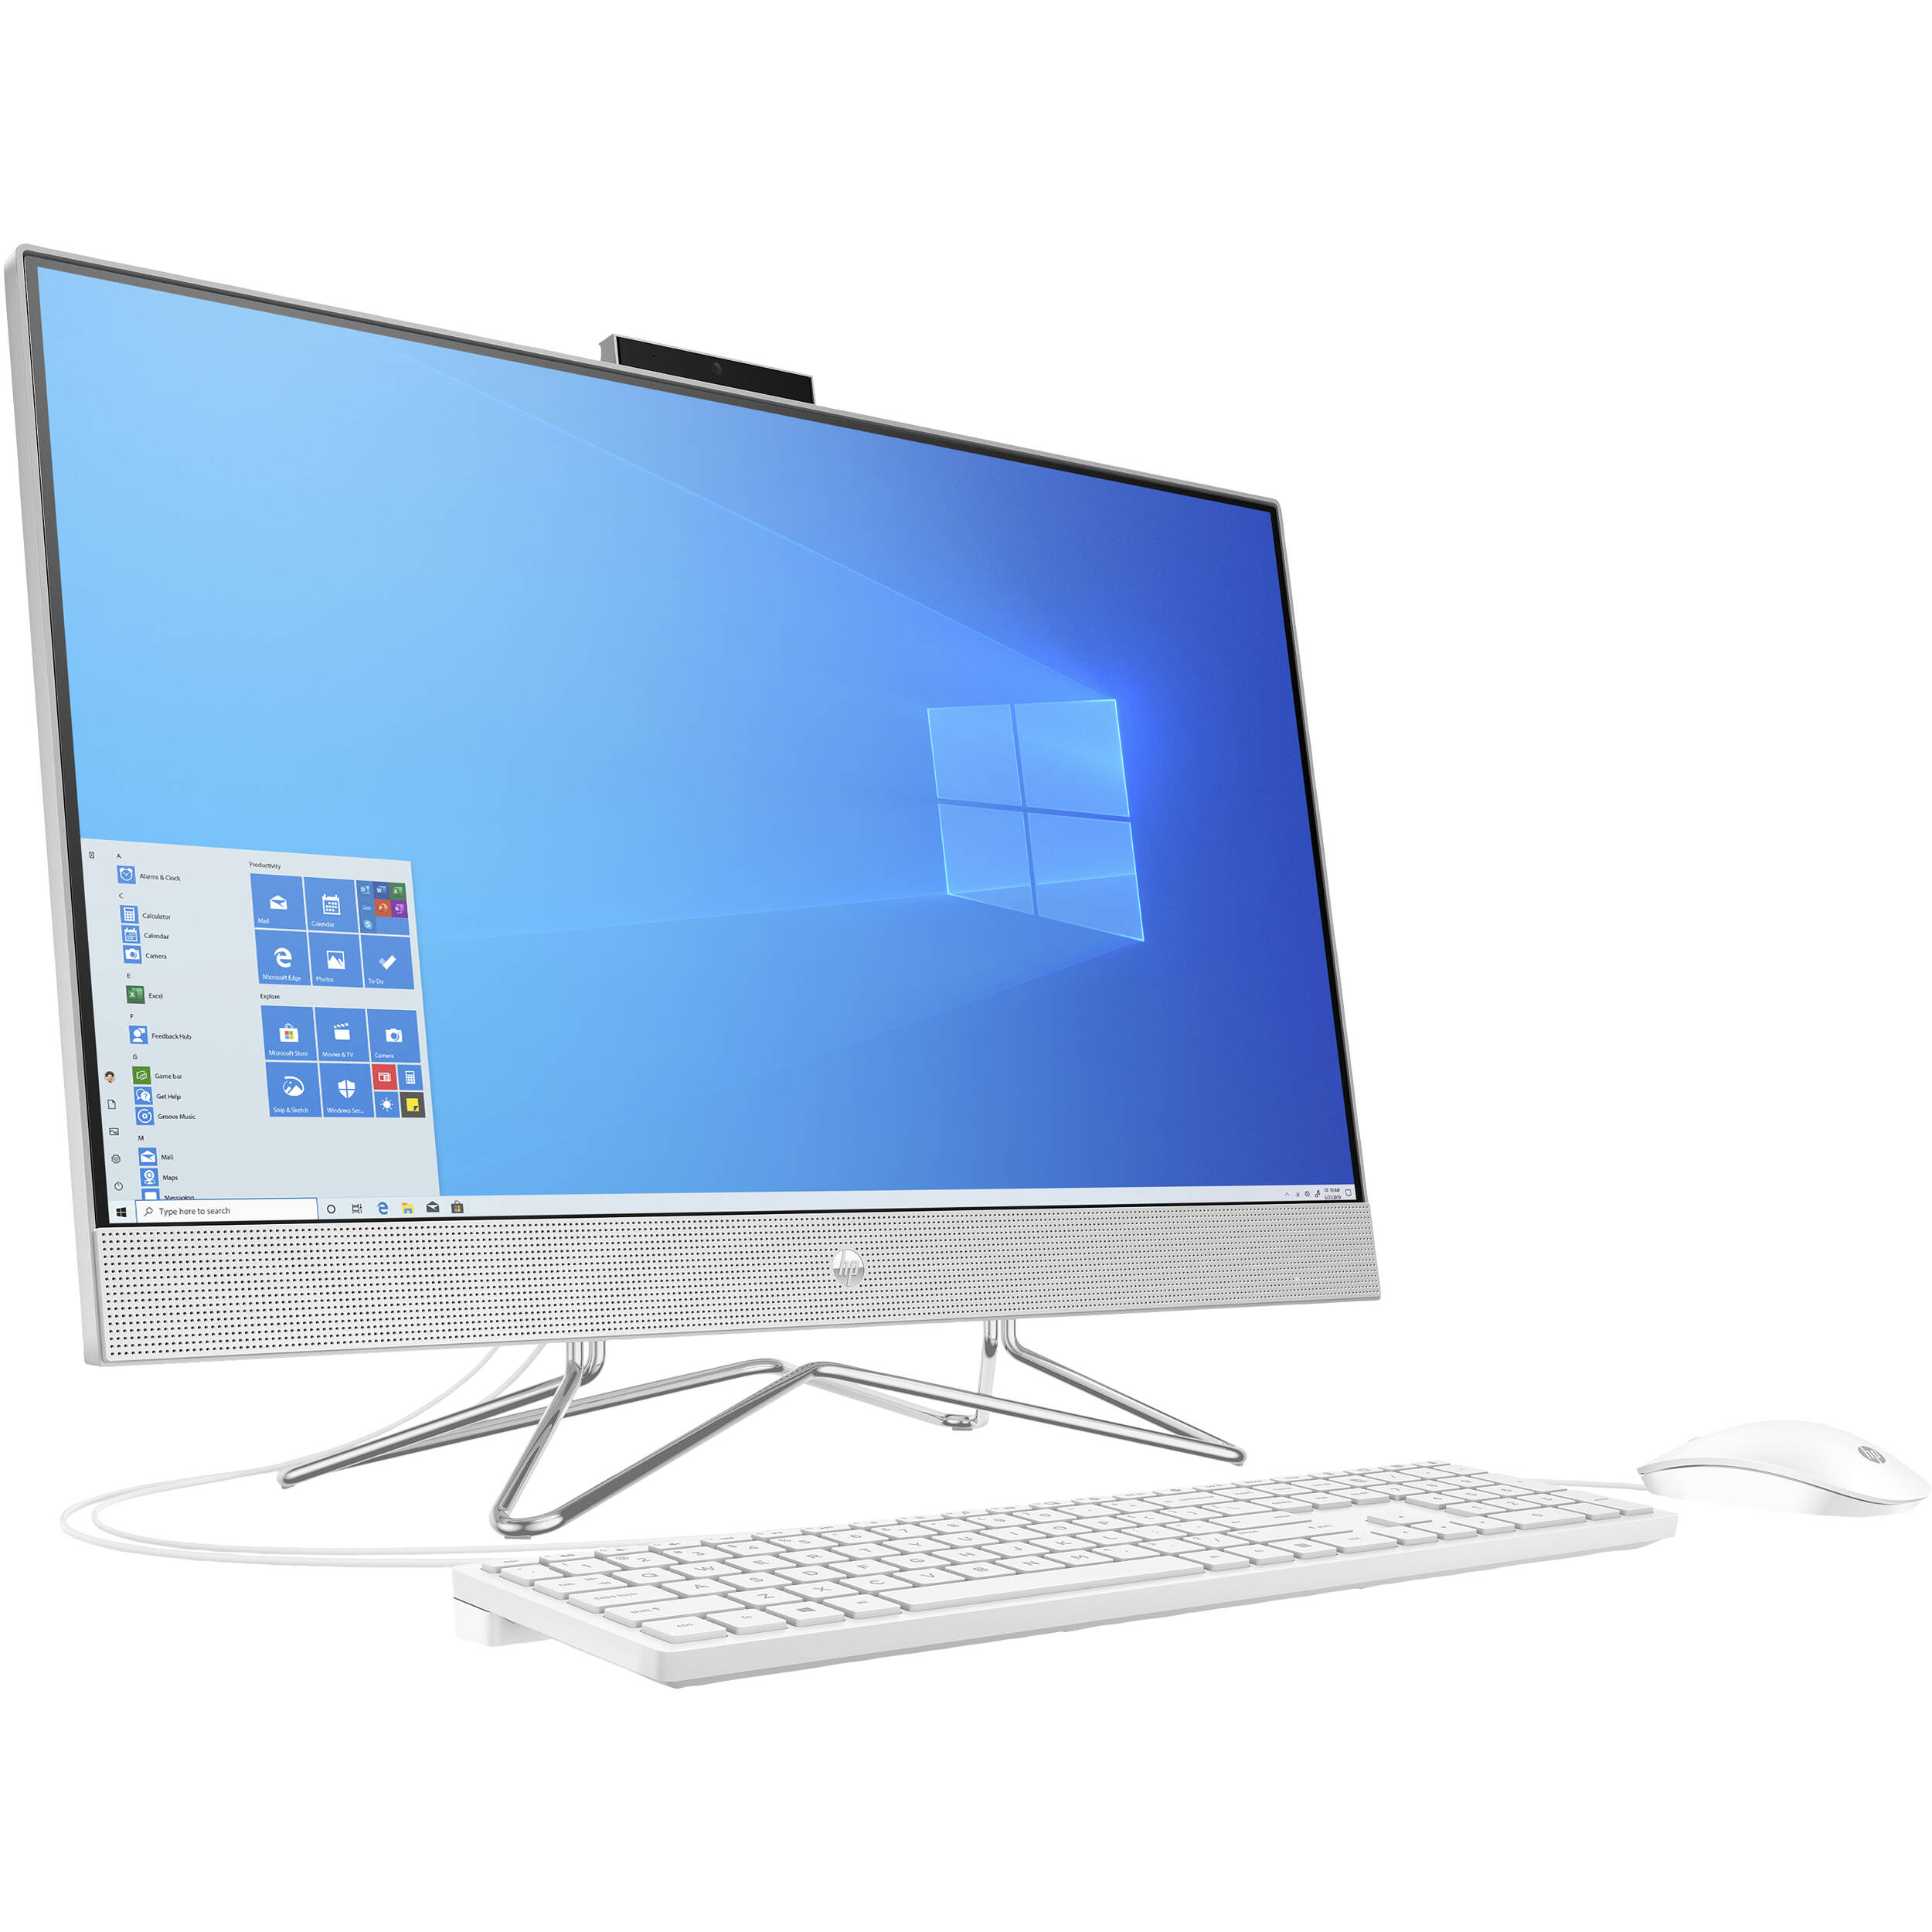 HP 27" Multi-Touch All-in-One Desktop Computer (Natural Silver)